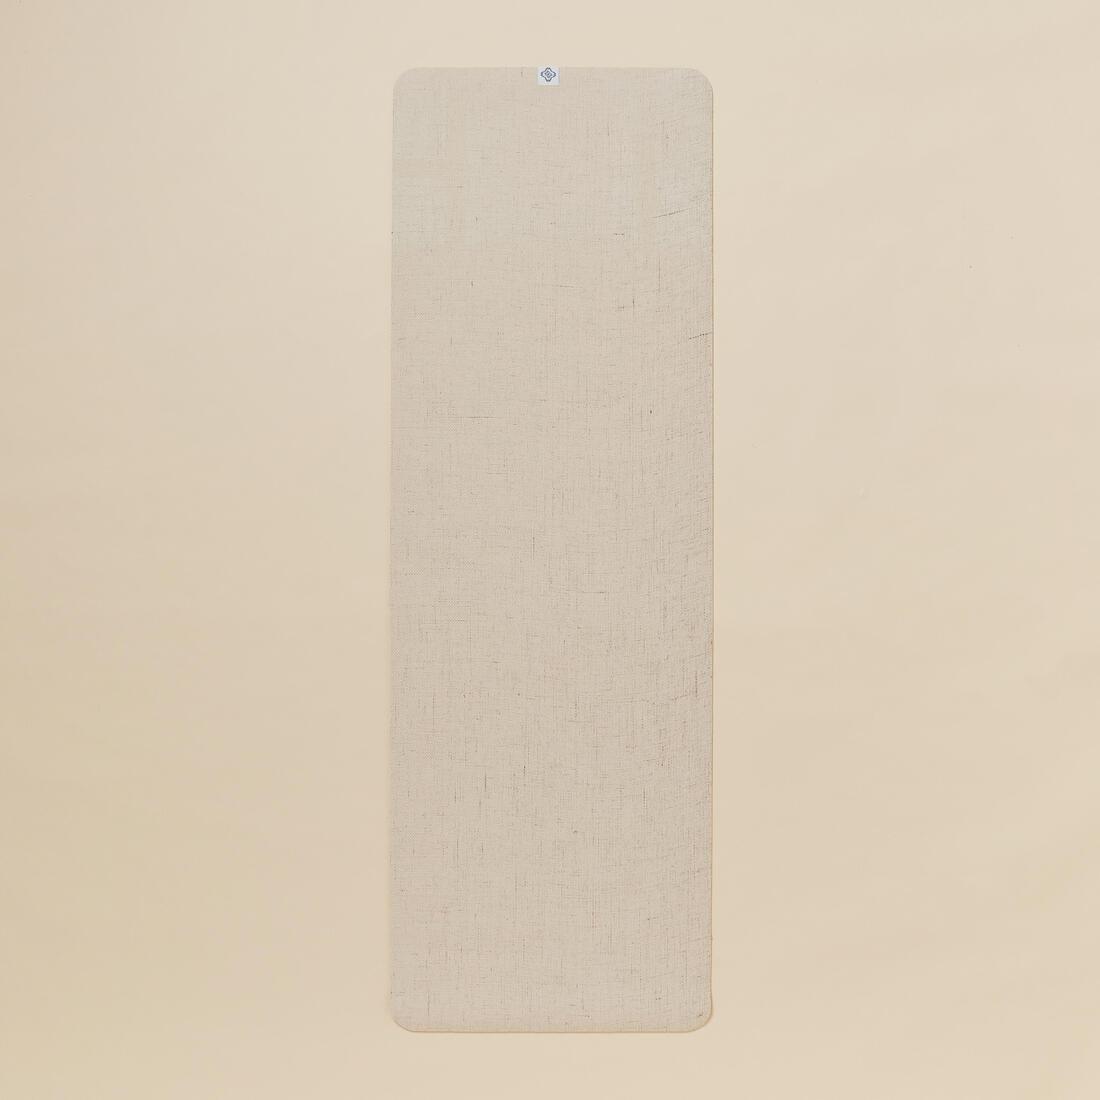 KIMJALY - 183 cm x 61 cm x 4 mm Jute and Natural Rubber Yoga Mat, Eggshell